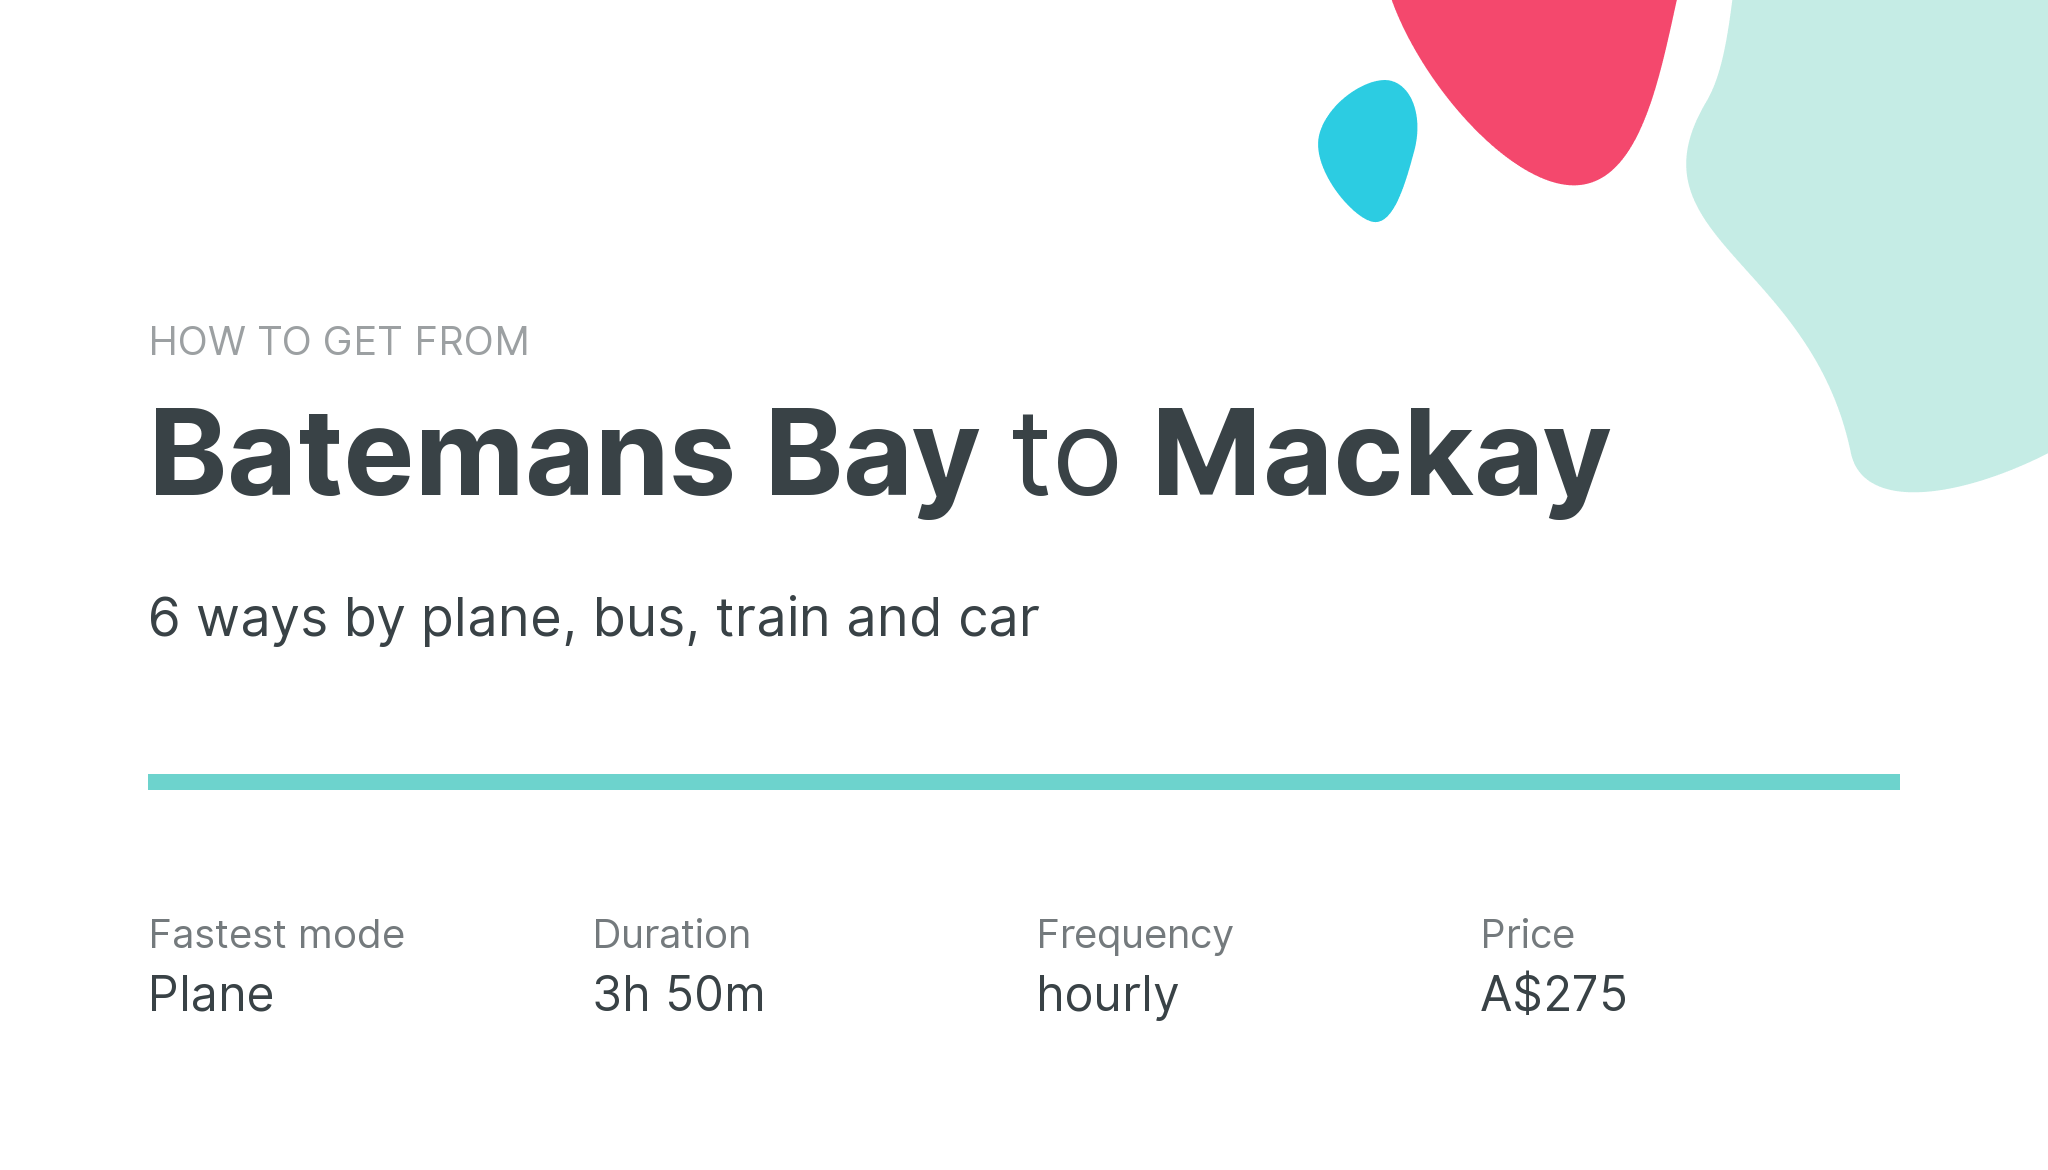 How do I get from Batemans Bay to Mackay